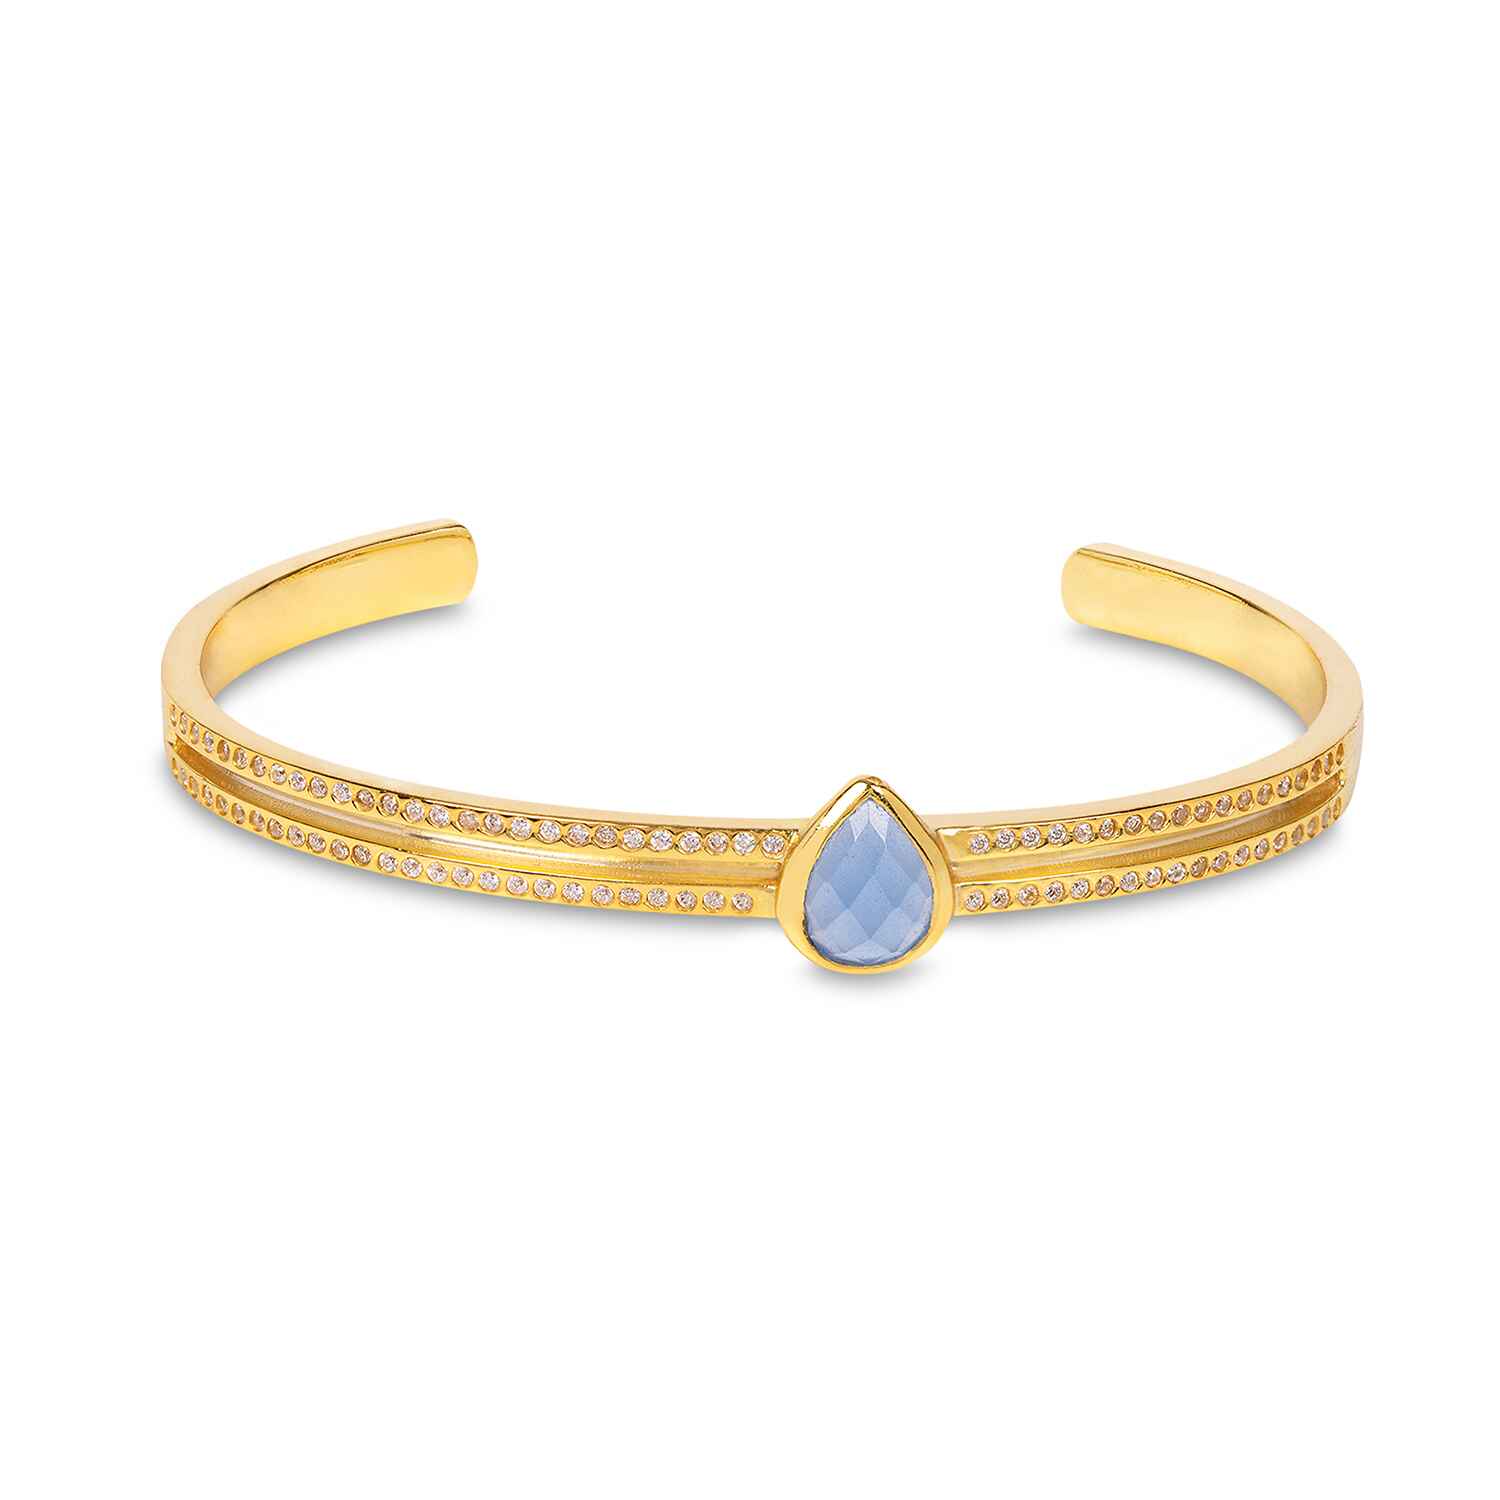 Designed with comfort, luxury and everyday wear in mind,the Athena Gold Cuff With&nbsp;&nbsp;Blue Chalcedony Diamonds is a sleek and lustrous bangle featuring hand cut pavé-set lab grown diamonds and sustainably sourced blue gemstone. The perfect base layer for your wrist stack.